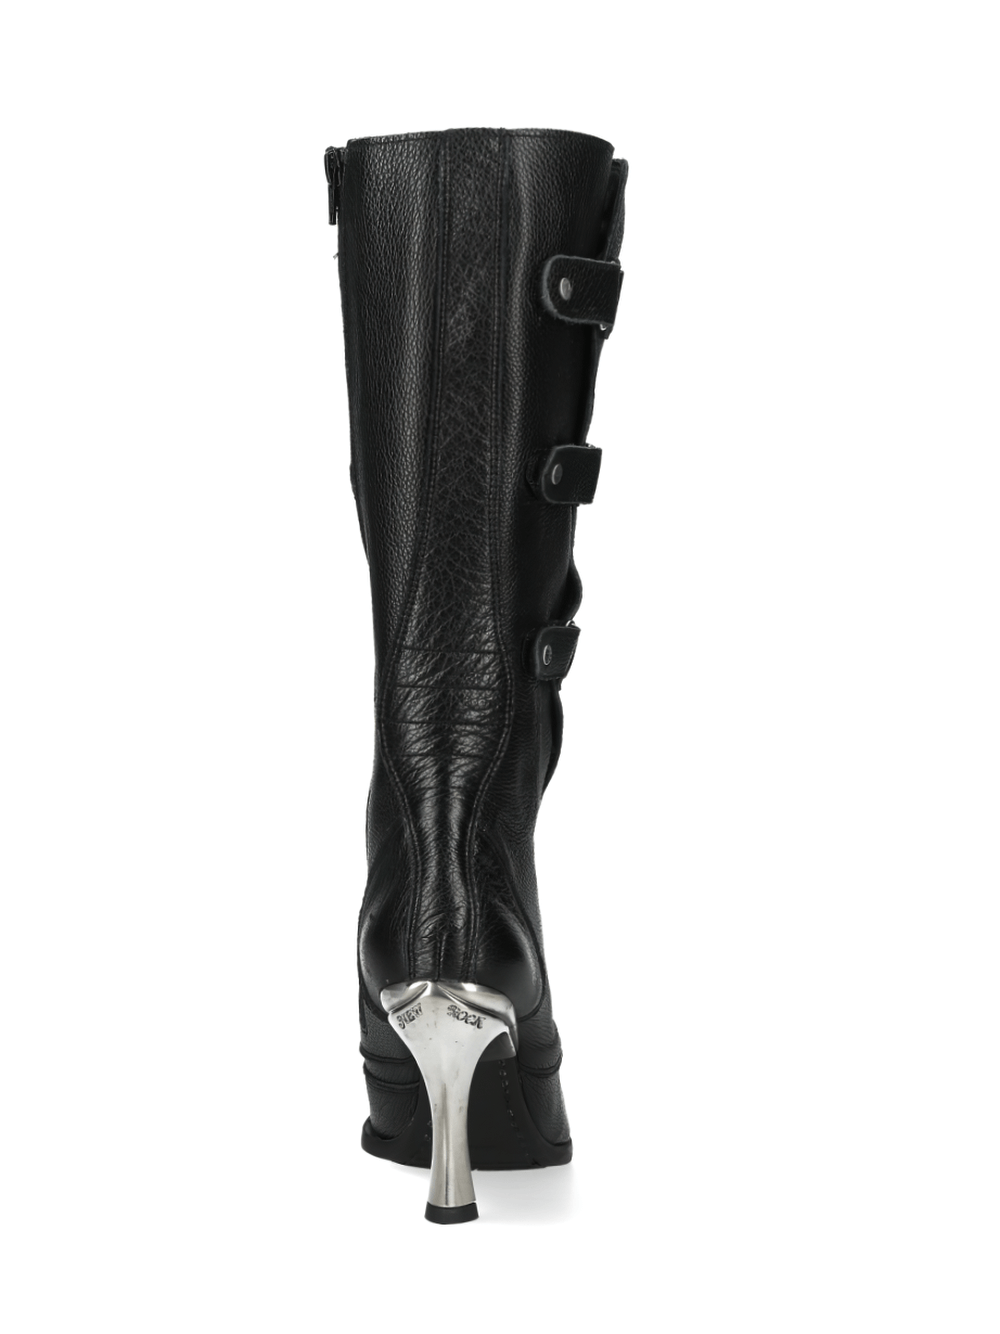 NEW ROCK Black Leather Punk-Rock Studded High Heel Boots